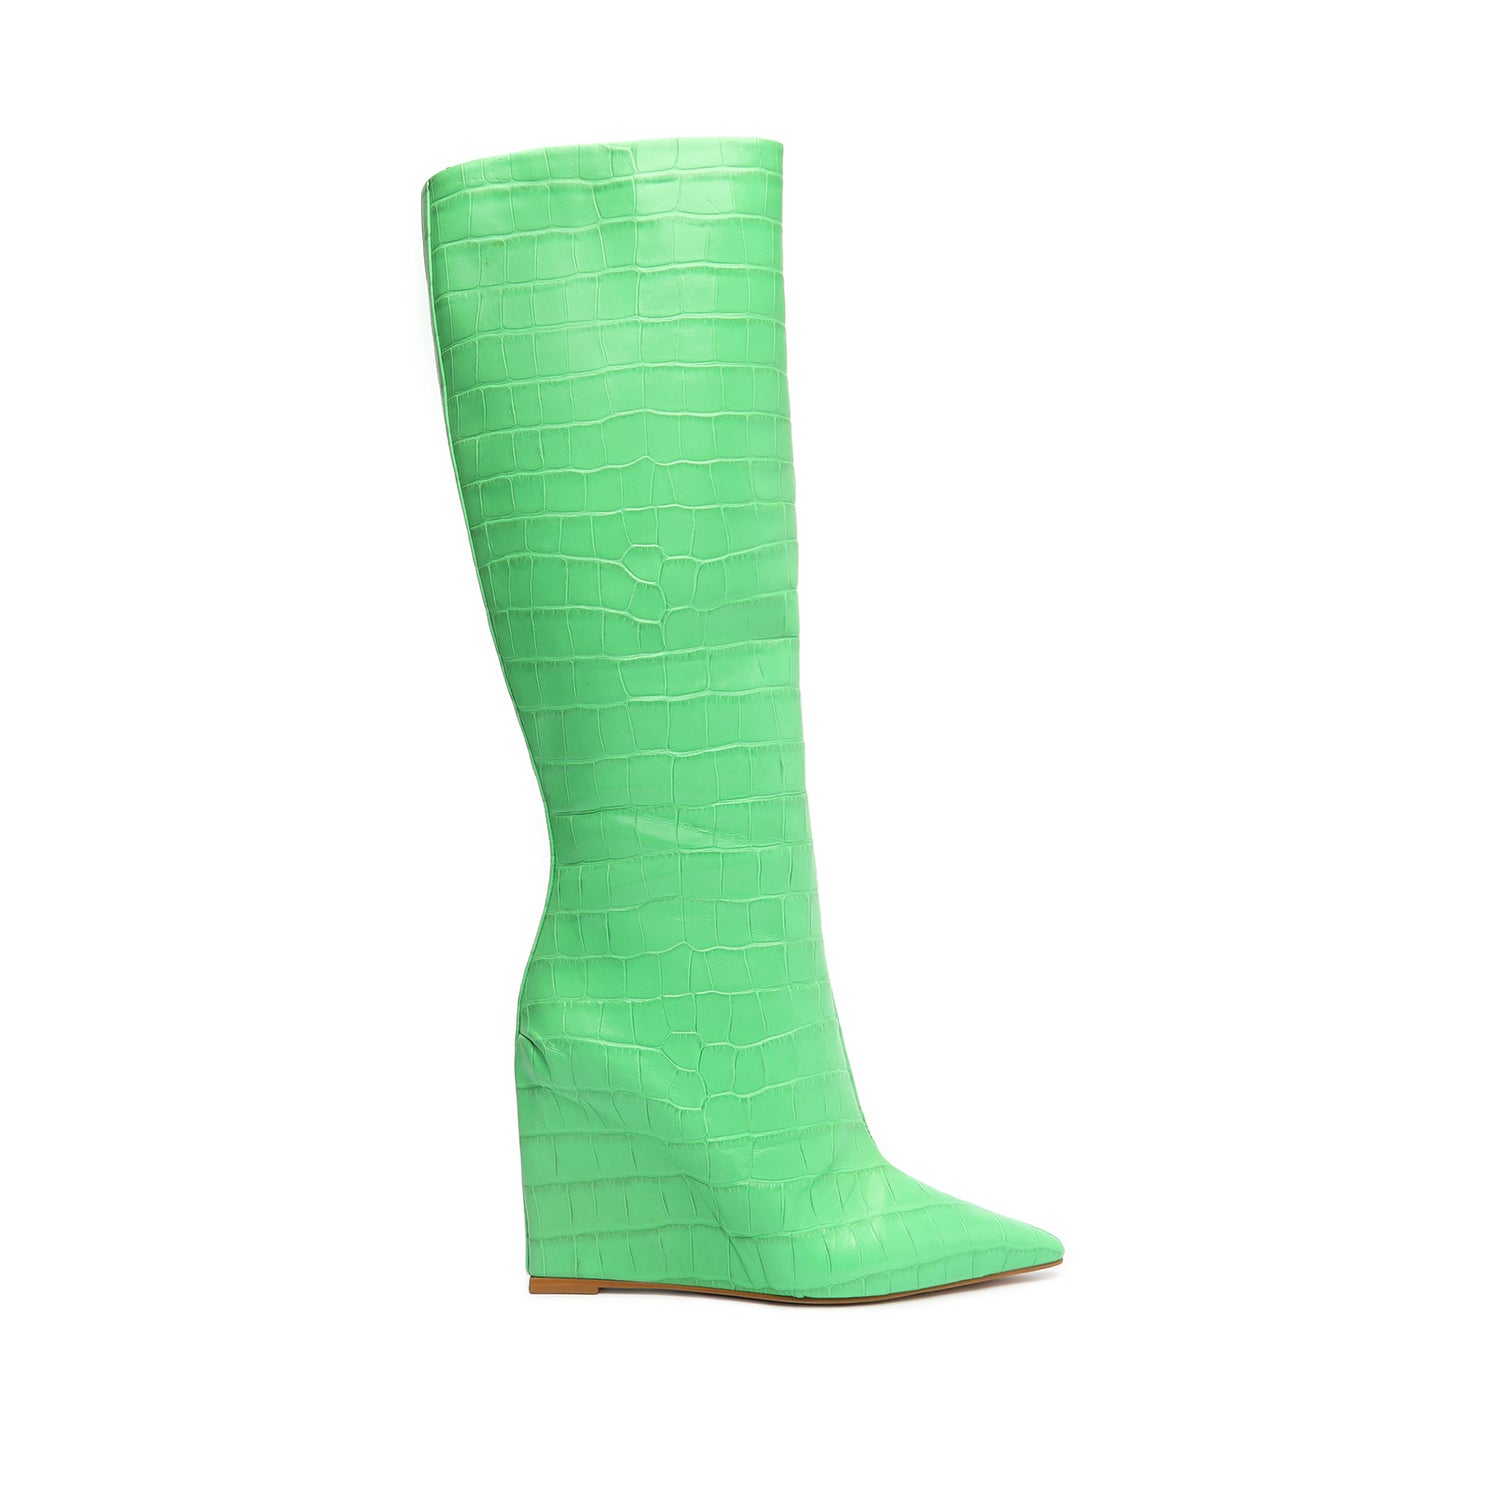 Asya Up Crocodile-Embossed Leather Boot Boots Sale 5 Gianni Green Crocodile-Embossed Leather - Schutz Shoes